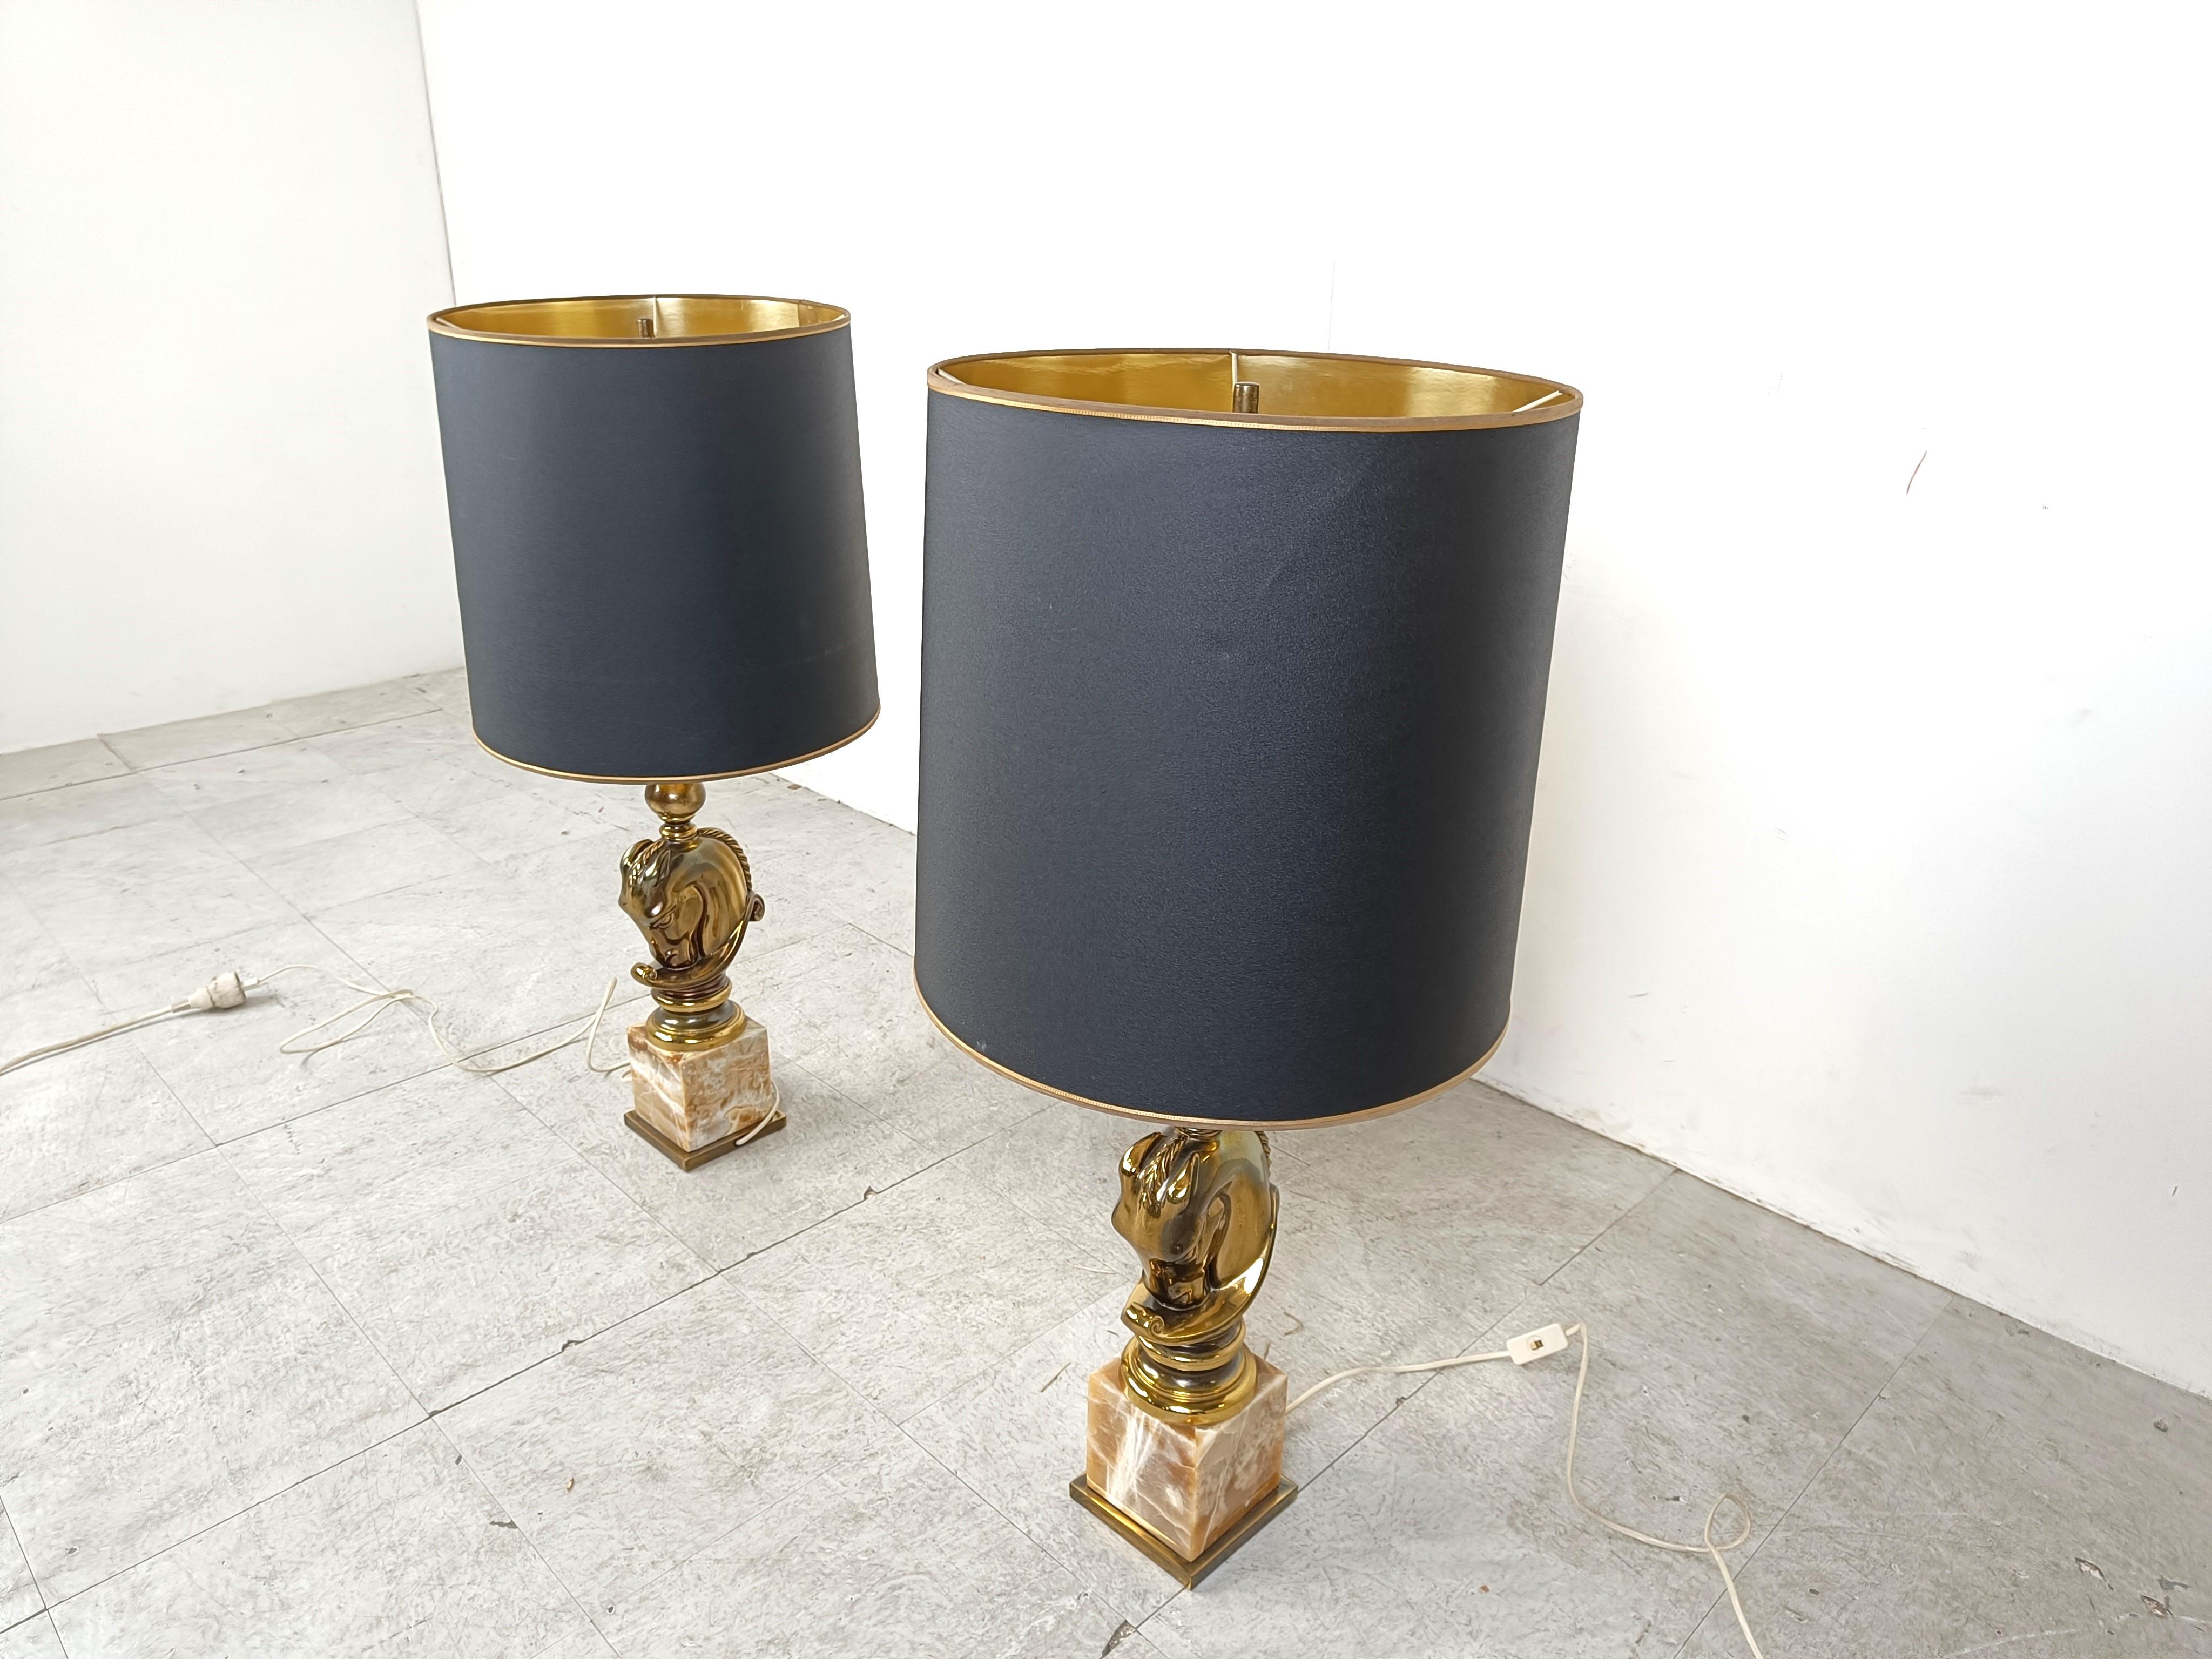 Late 20th Century Pair of Brass Horse Head Table Lamps, 1970s Belgium For Sale